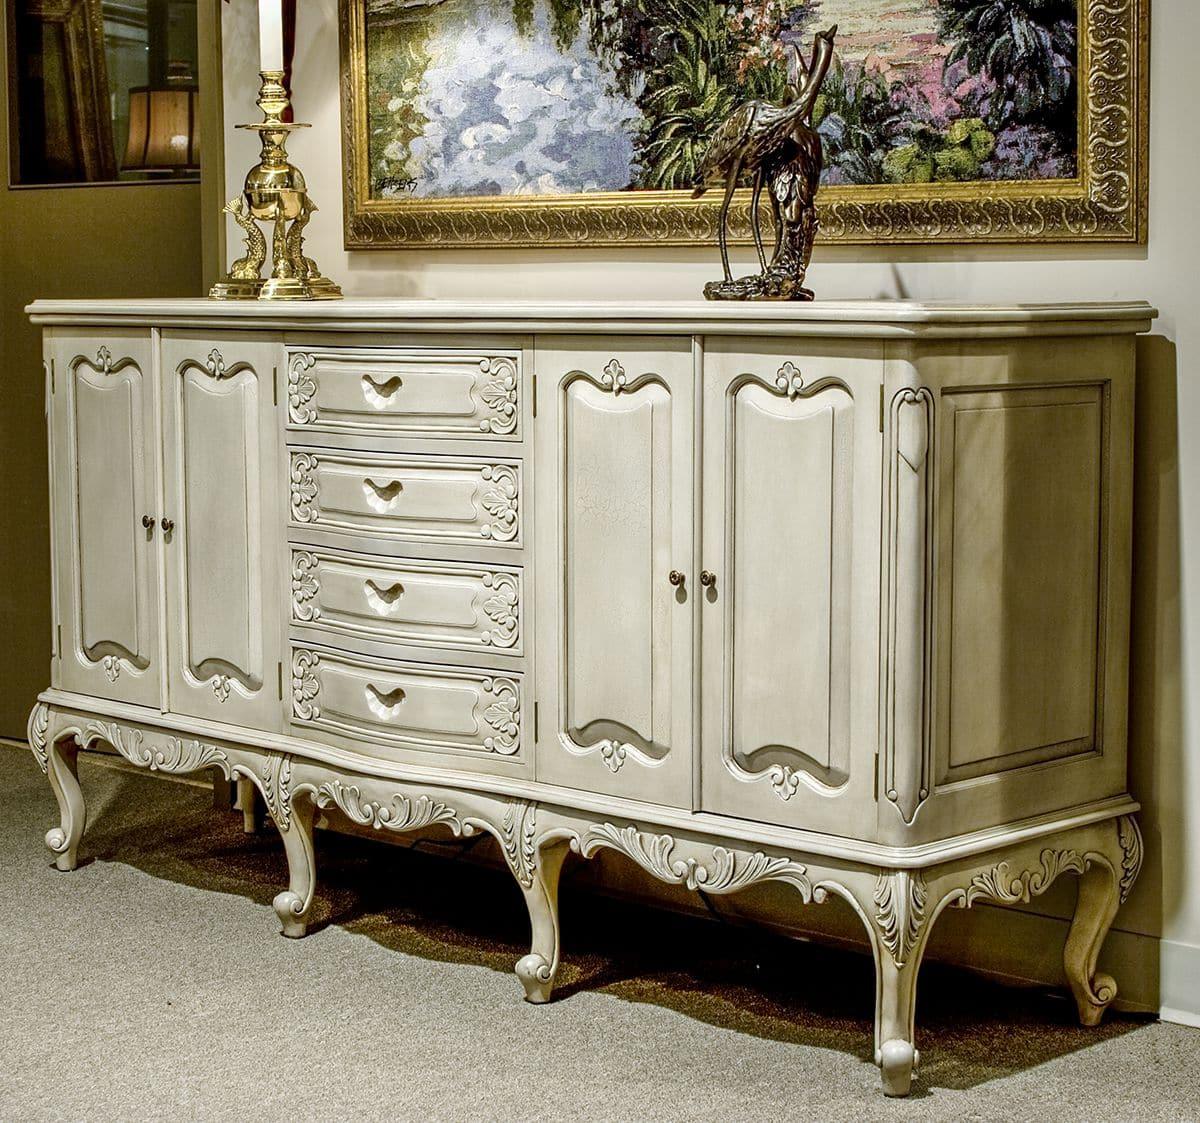 LARGE SERPENTINE SIDEBOARD - House of Chippendale